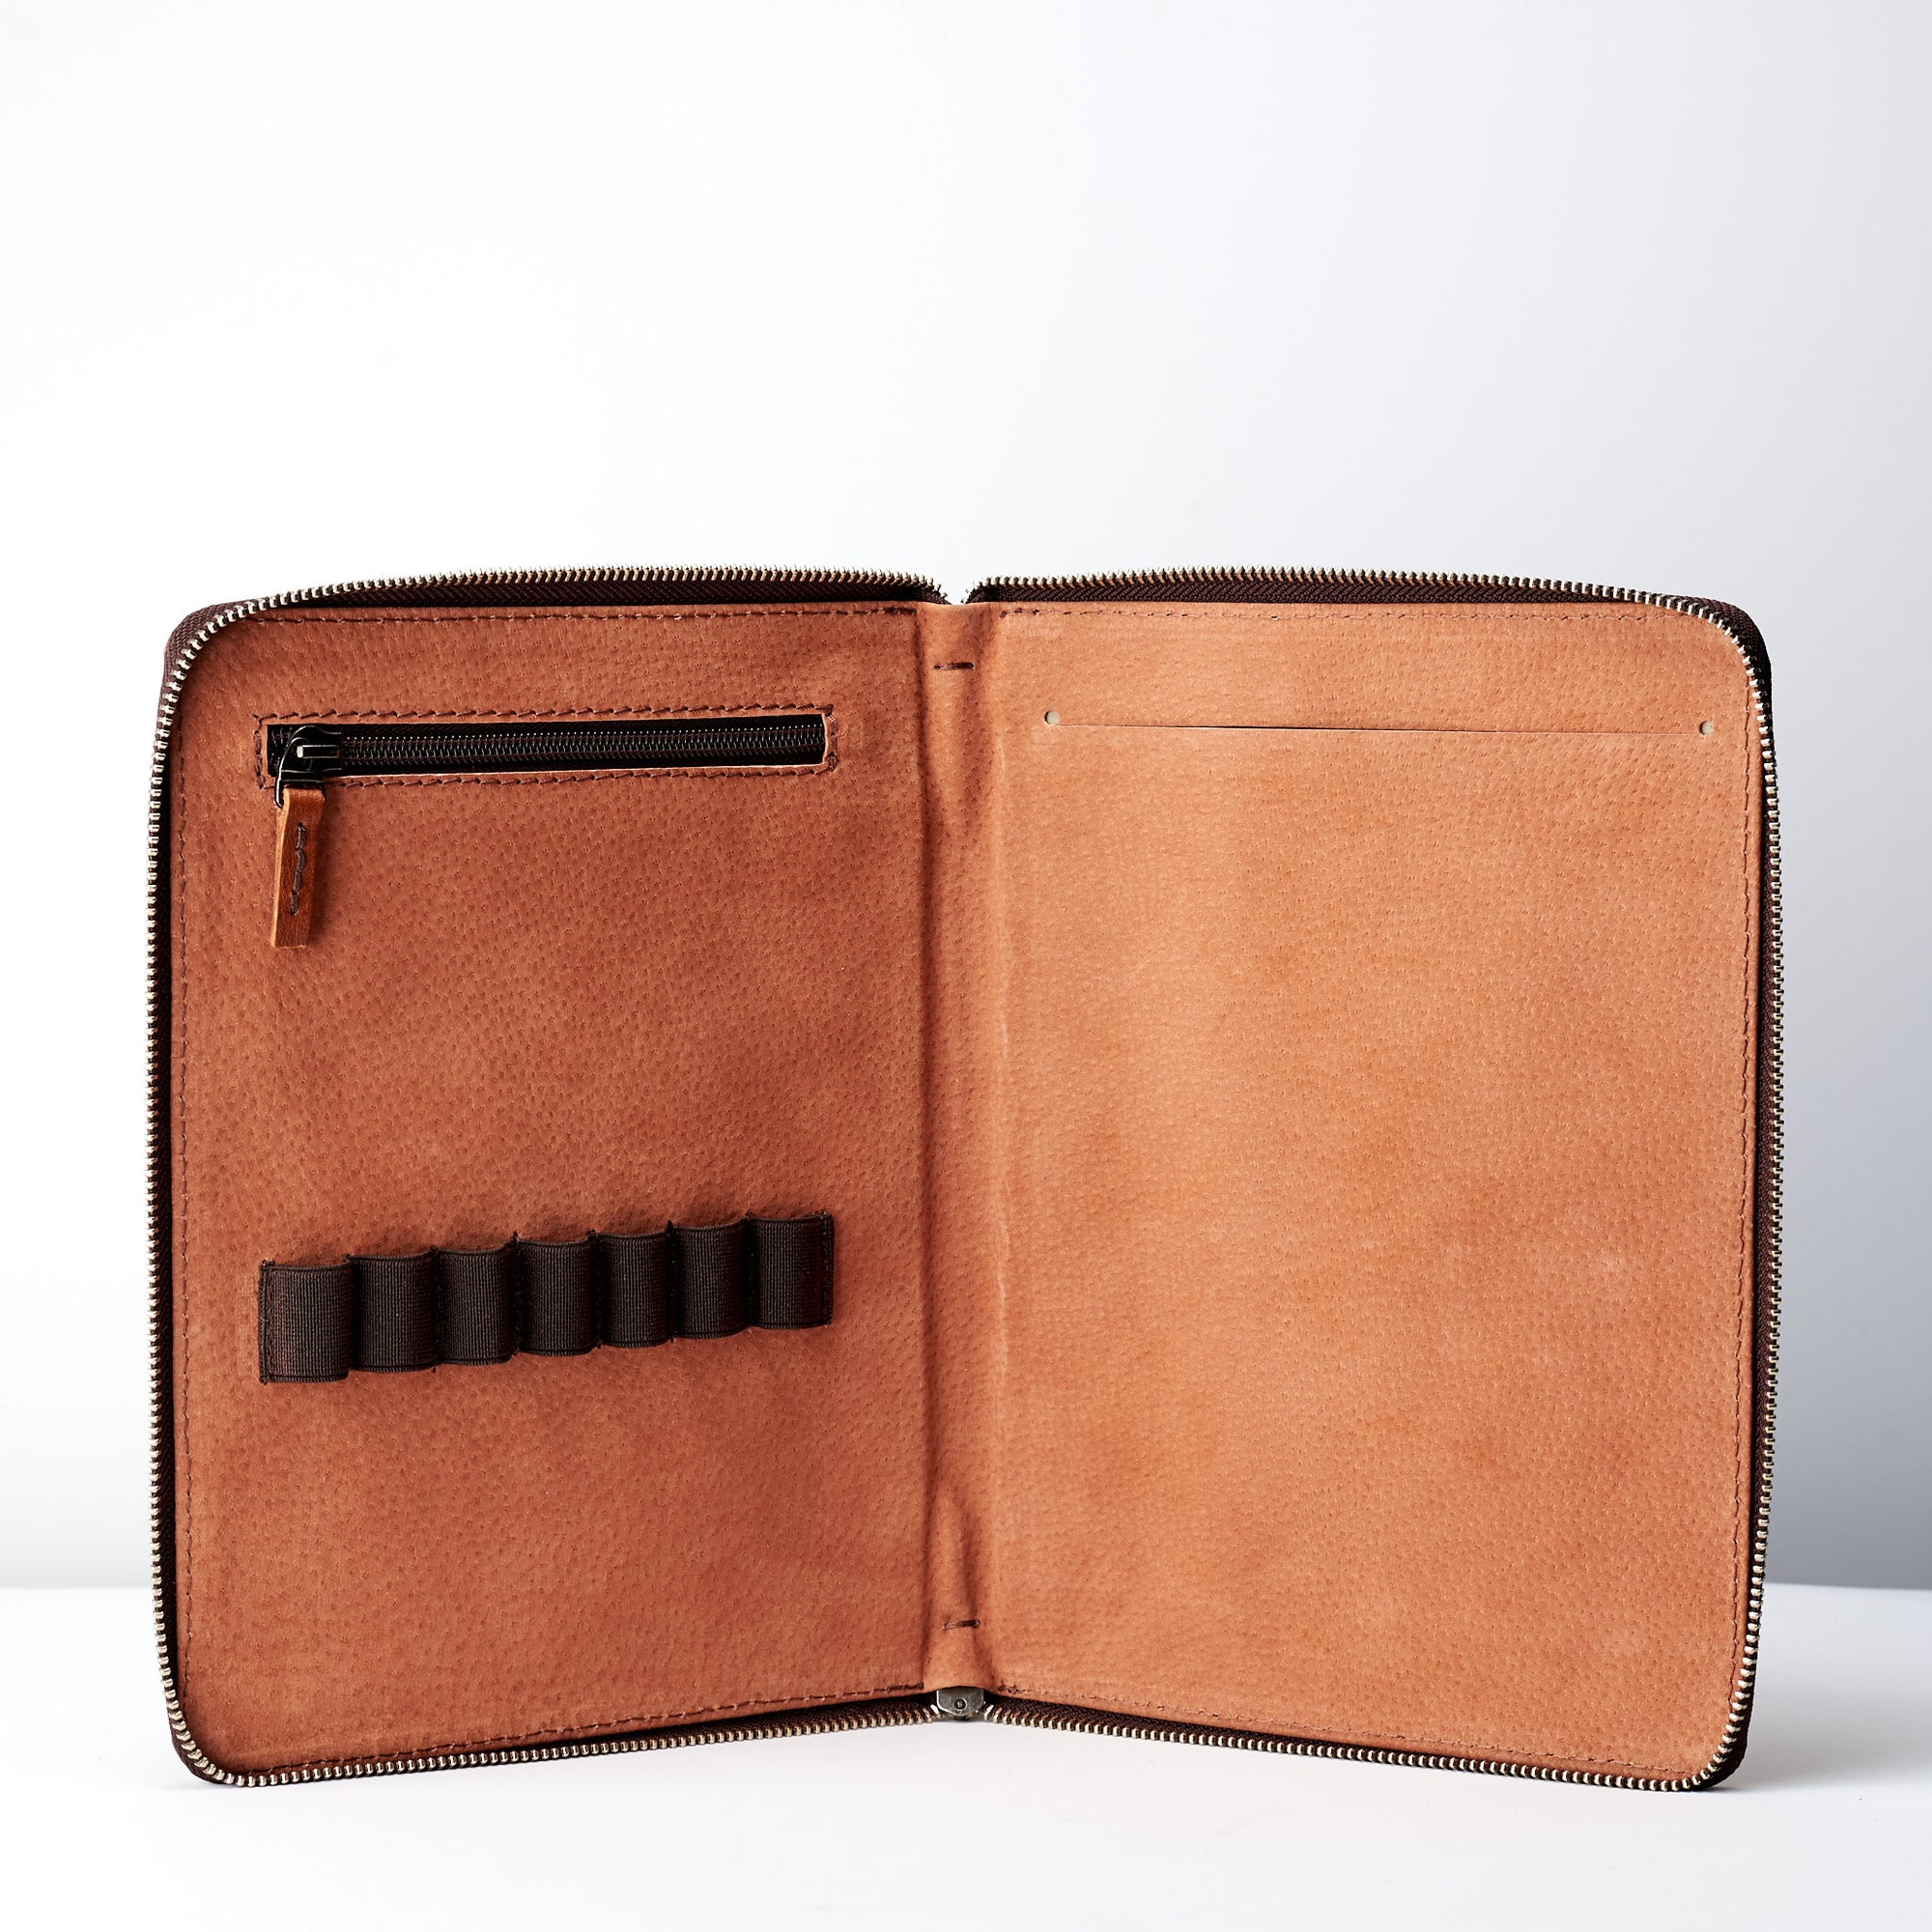 Interior. Pen pencil slot. A5 leather notebook cover by Capra Leather. Gifts for artists.